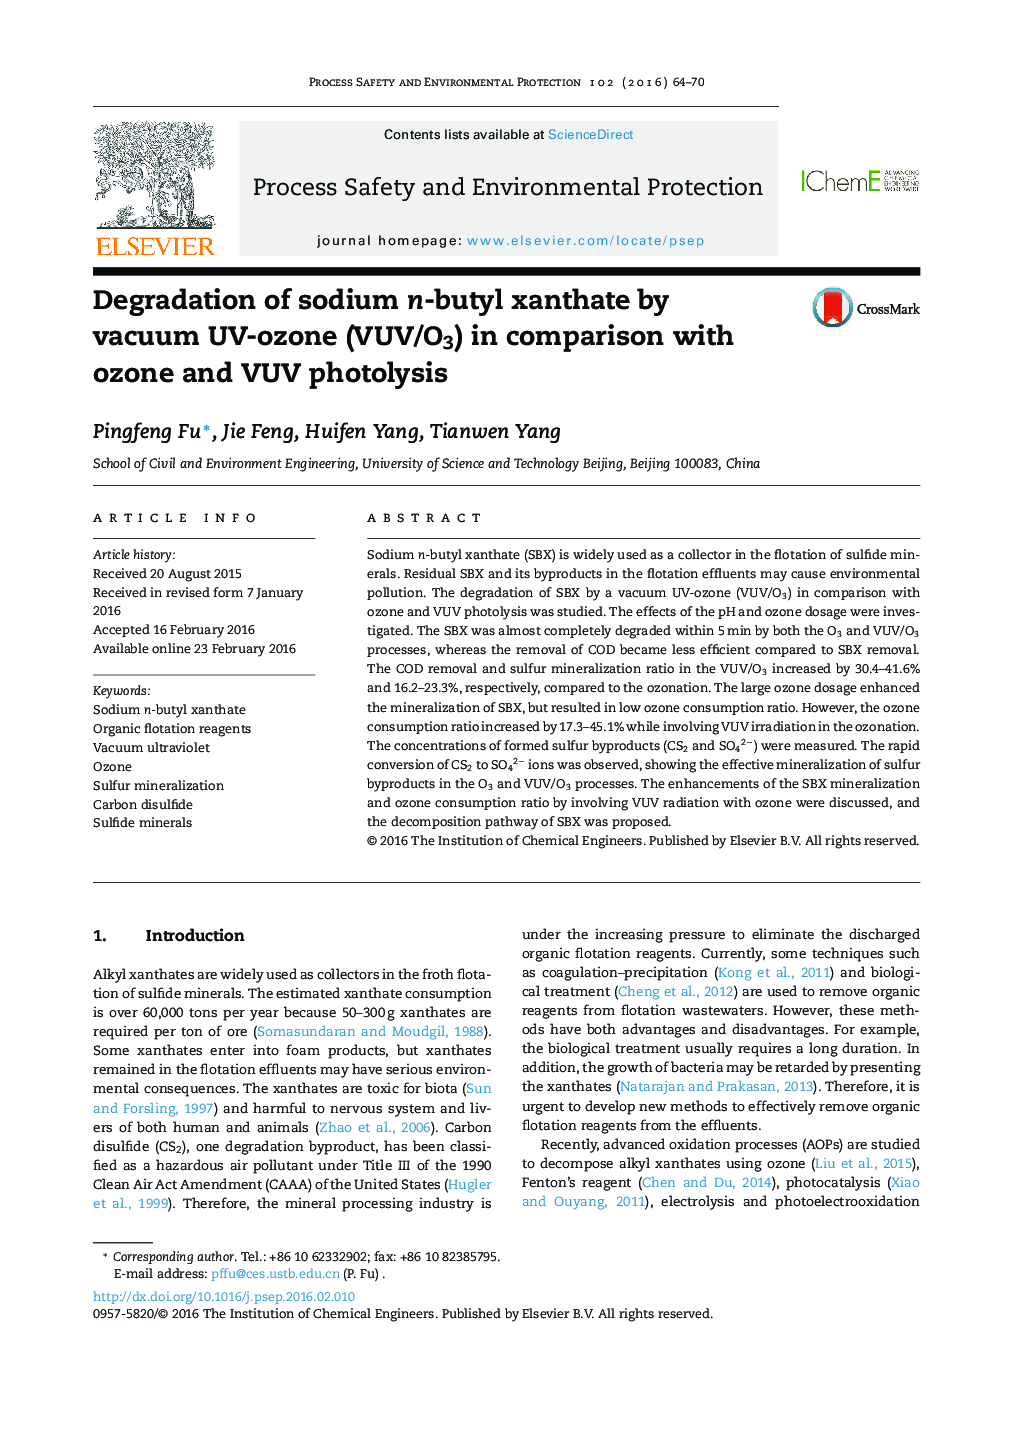 Degradation of sodium n-butyl xanthate by vacuum UV-ozone (VUV/O3) in comparison with ozone and VUV photolysis